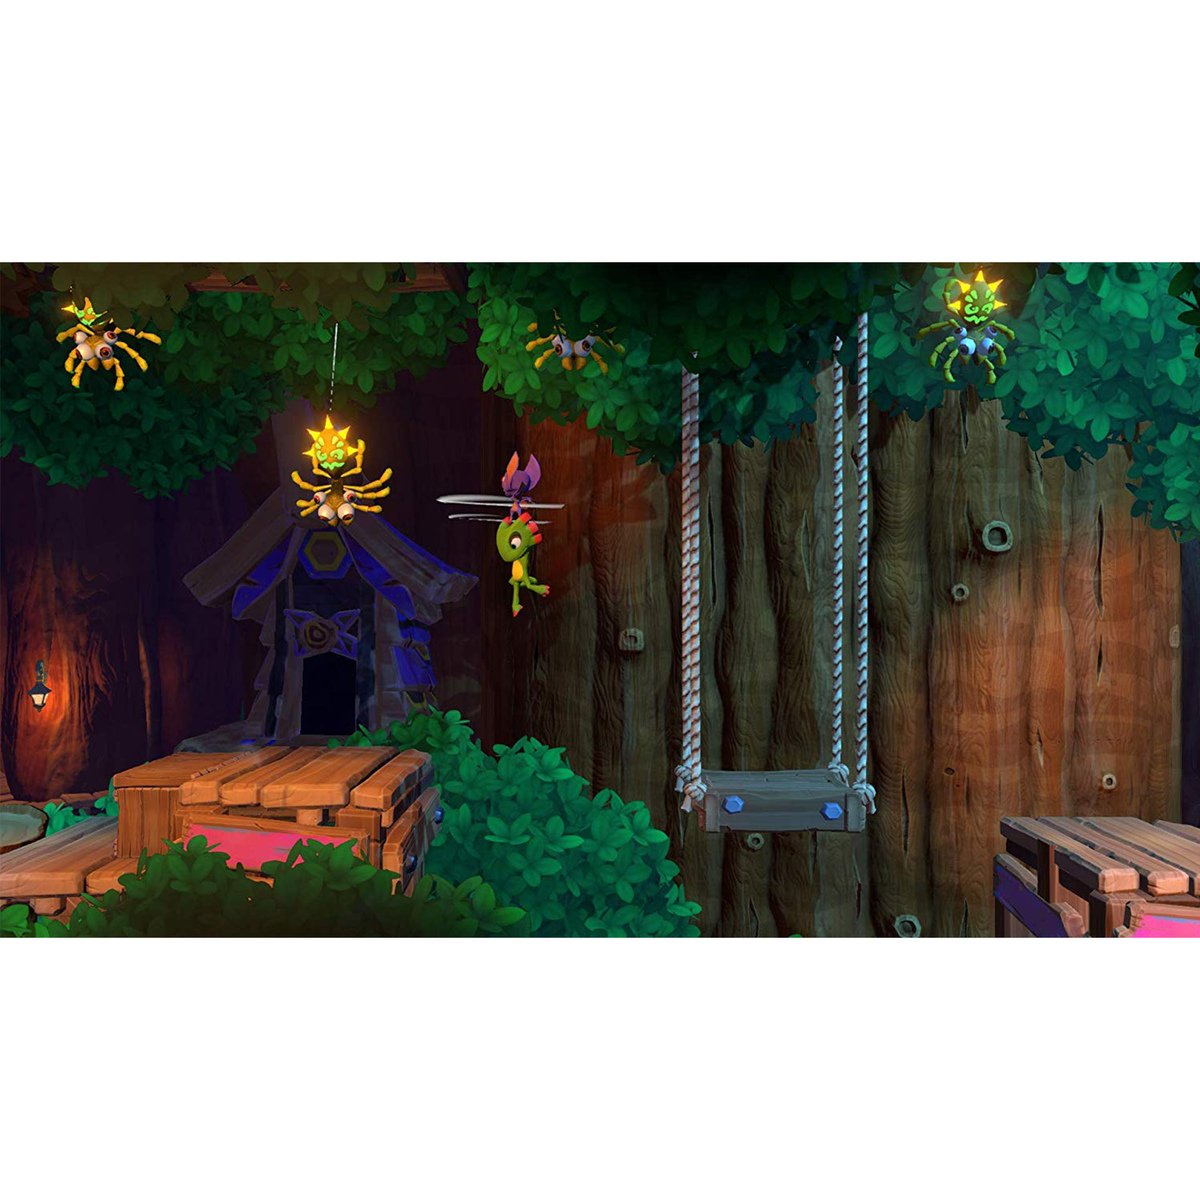 Yooka-Laylee And The Impossible Lair (PS4)